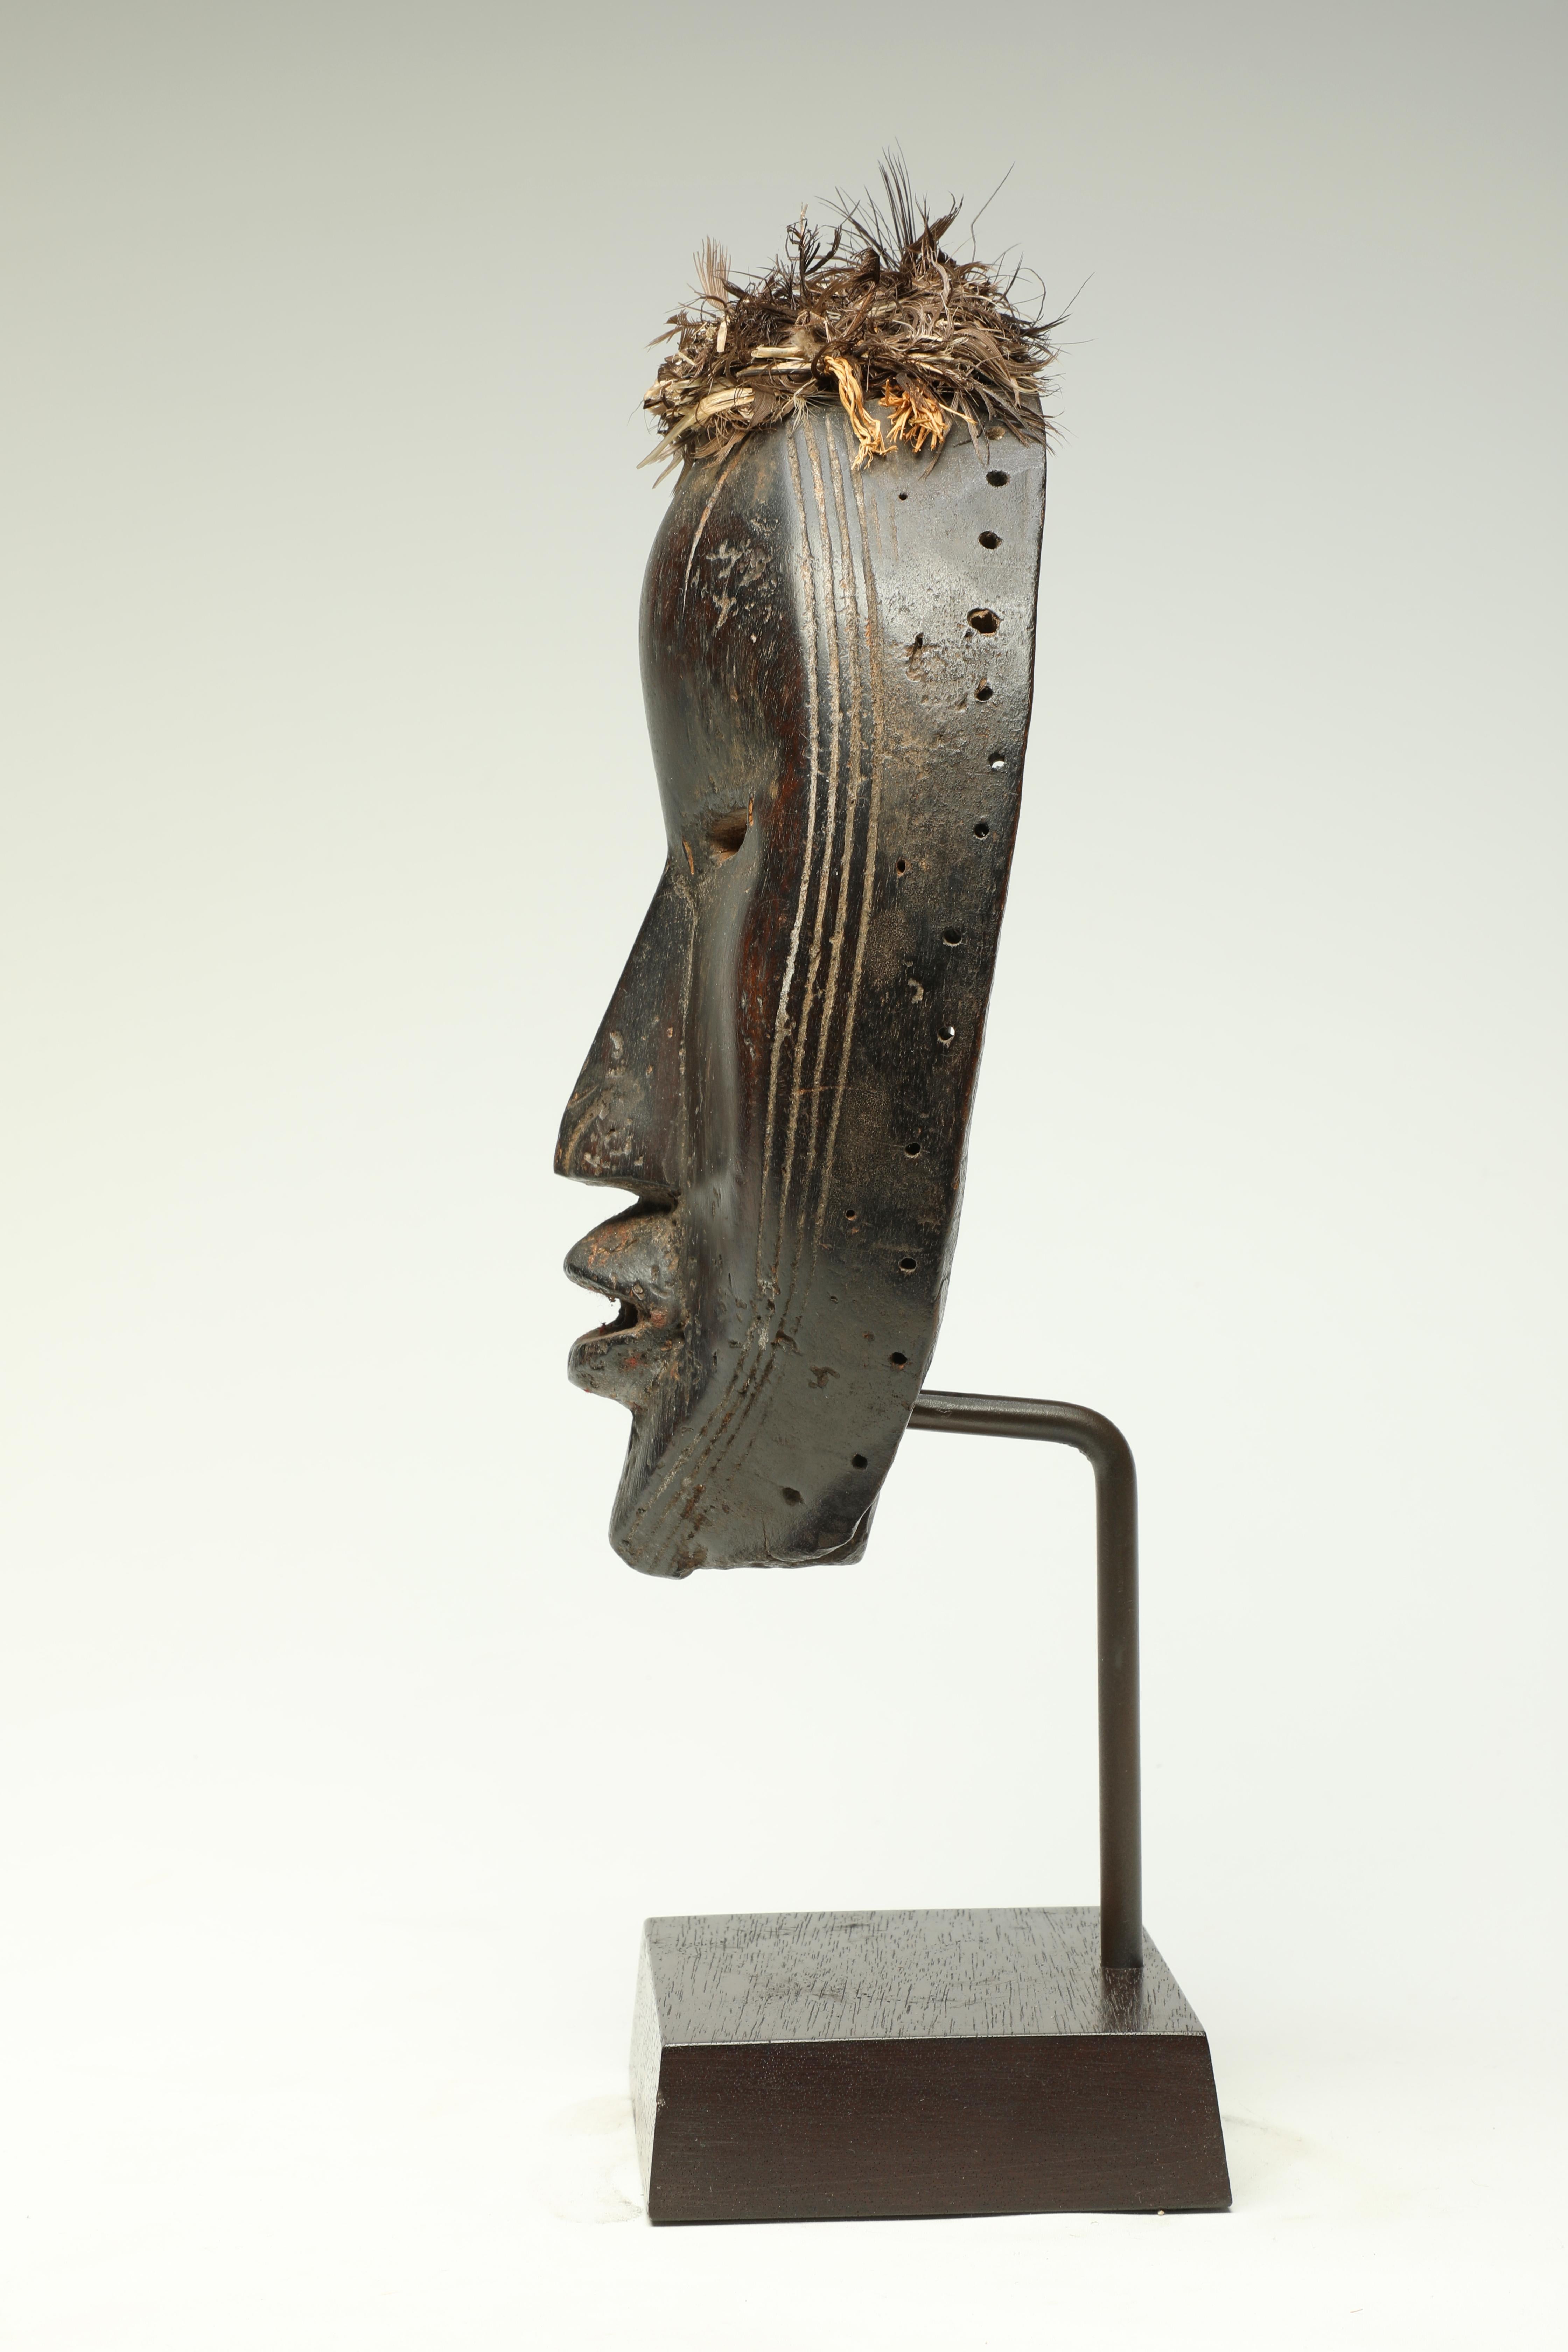 Tribal Expressive Early Classic Cubist Dan Mask Early 20th Century Liberia, Africa For Sale